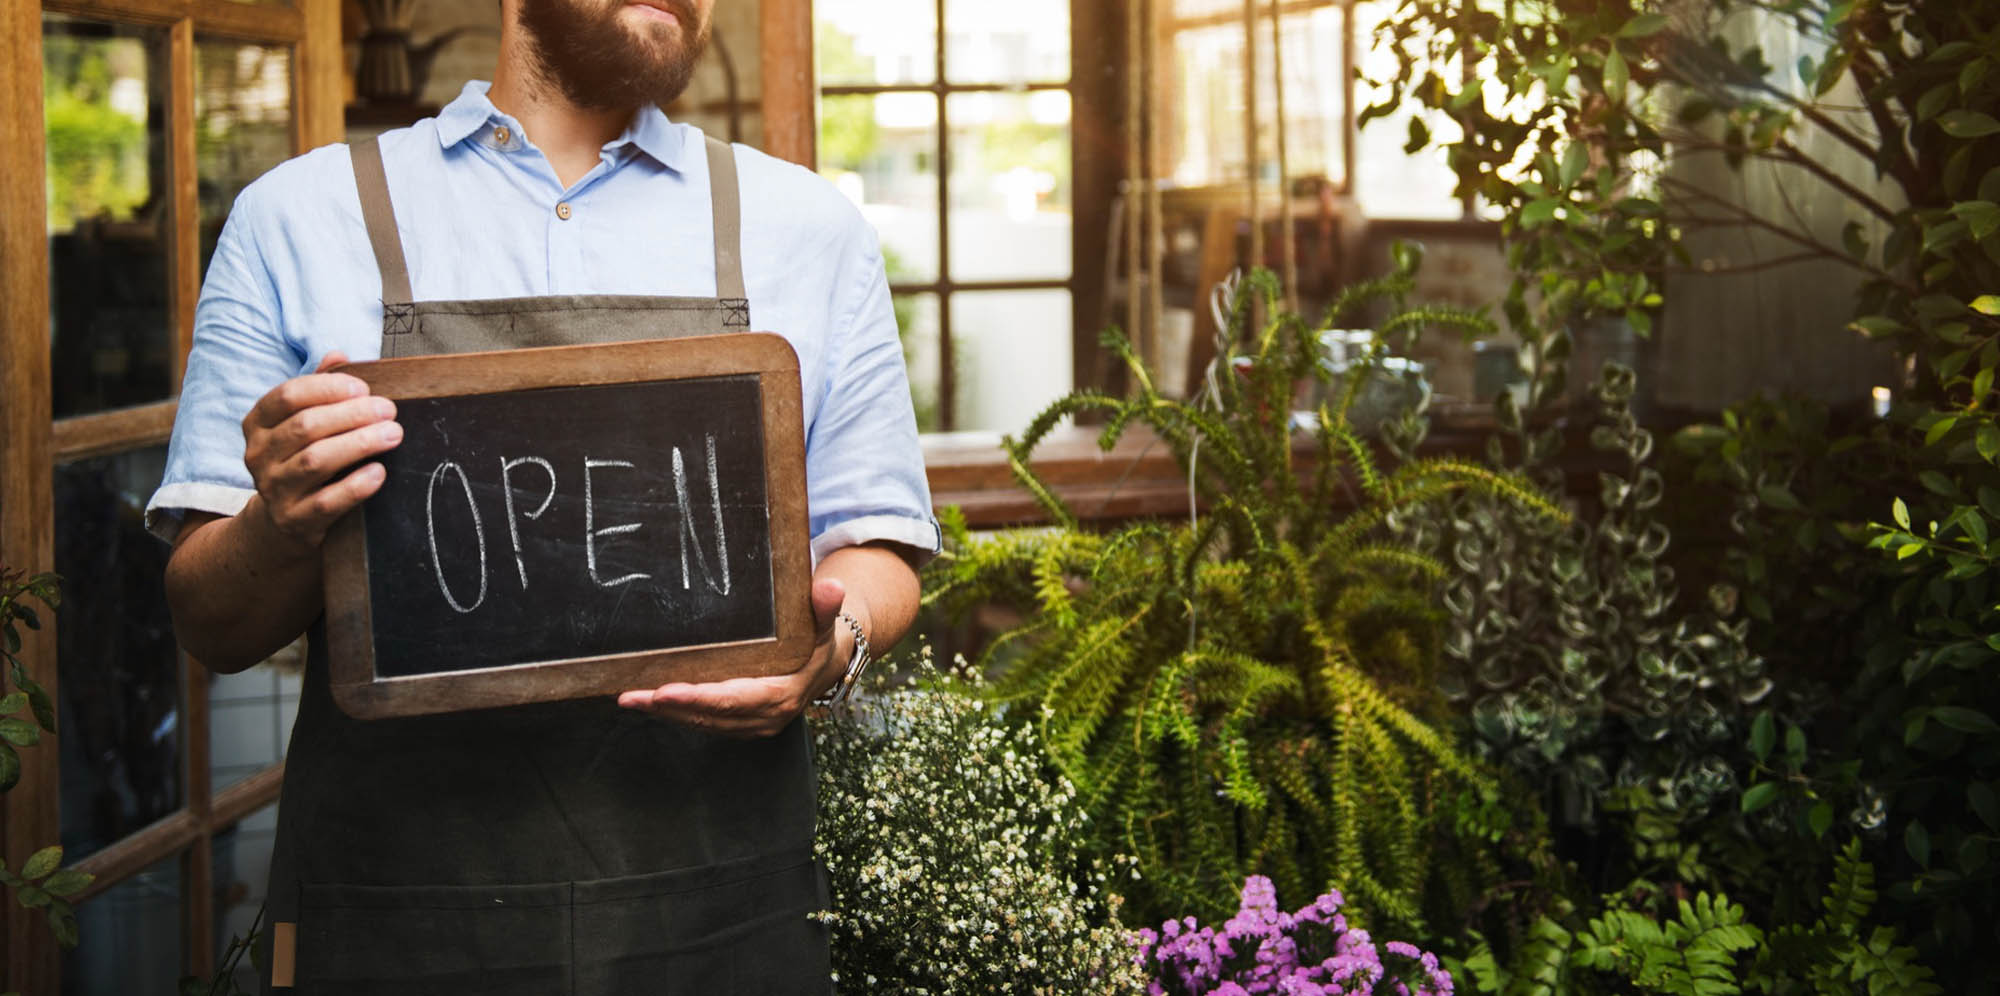 A small business owner holding an open for business sign